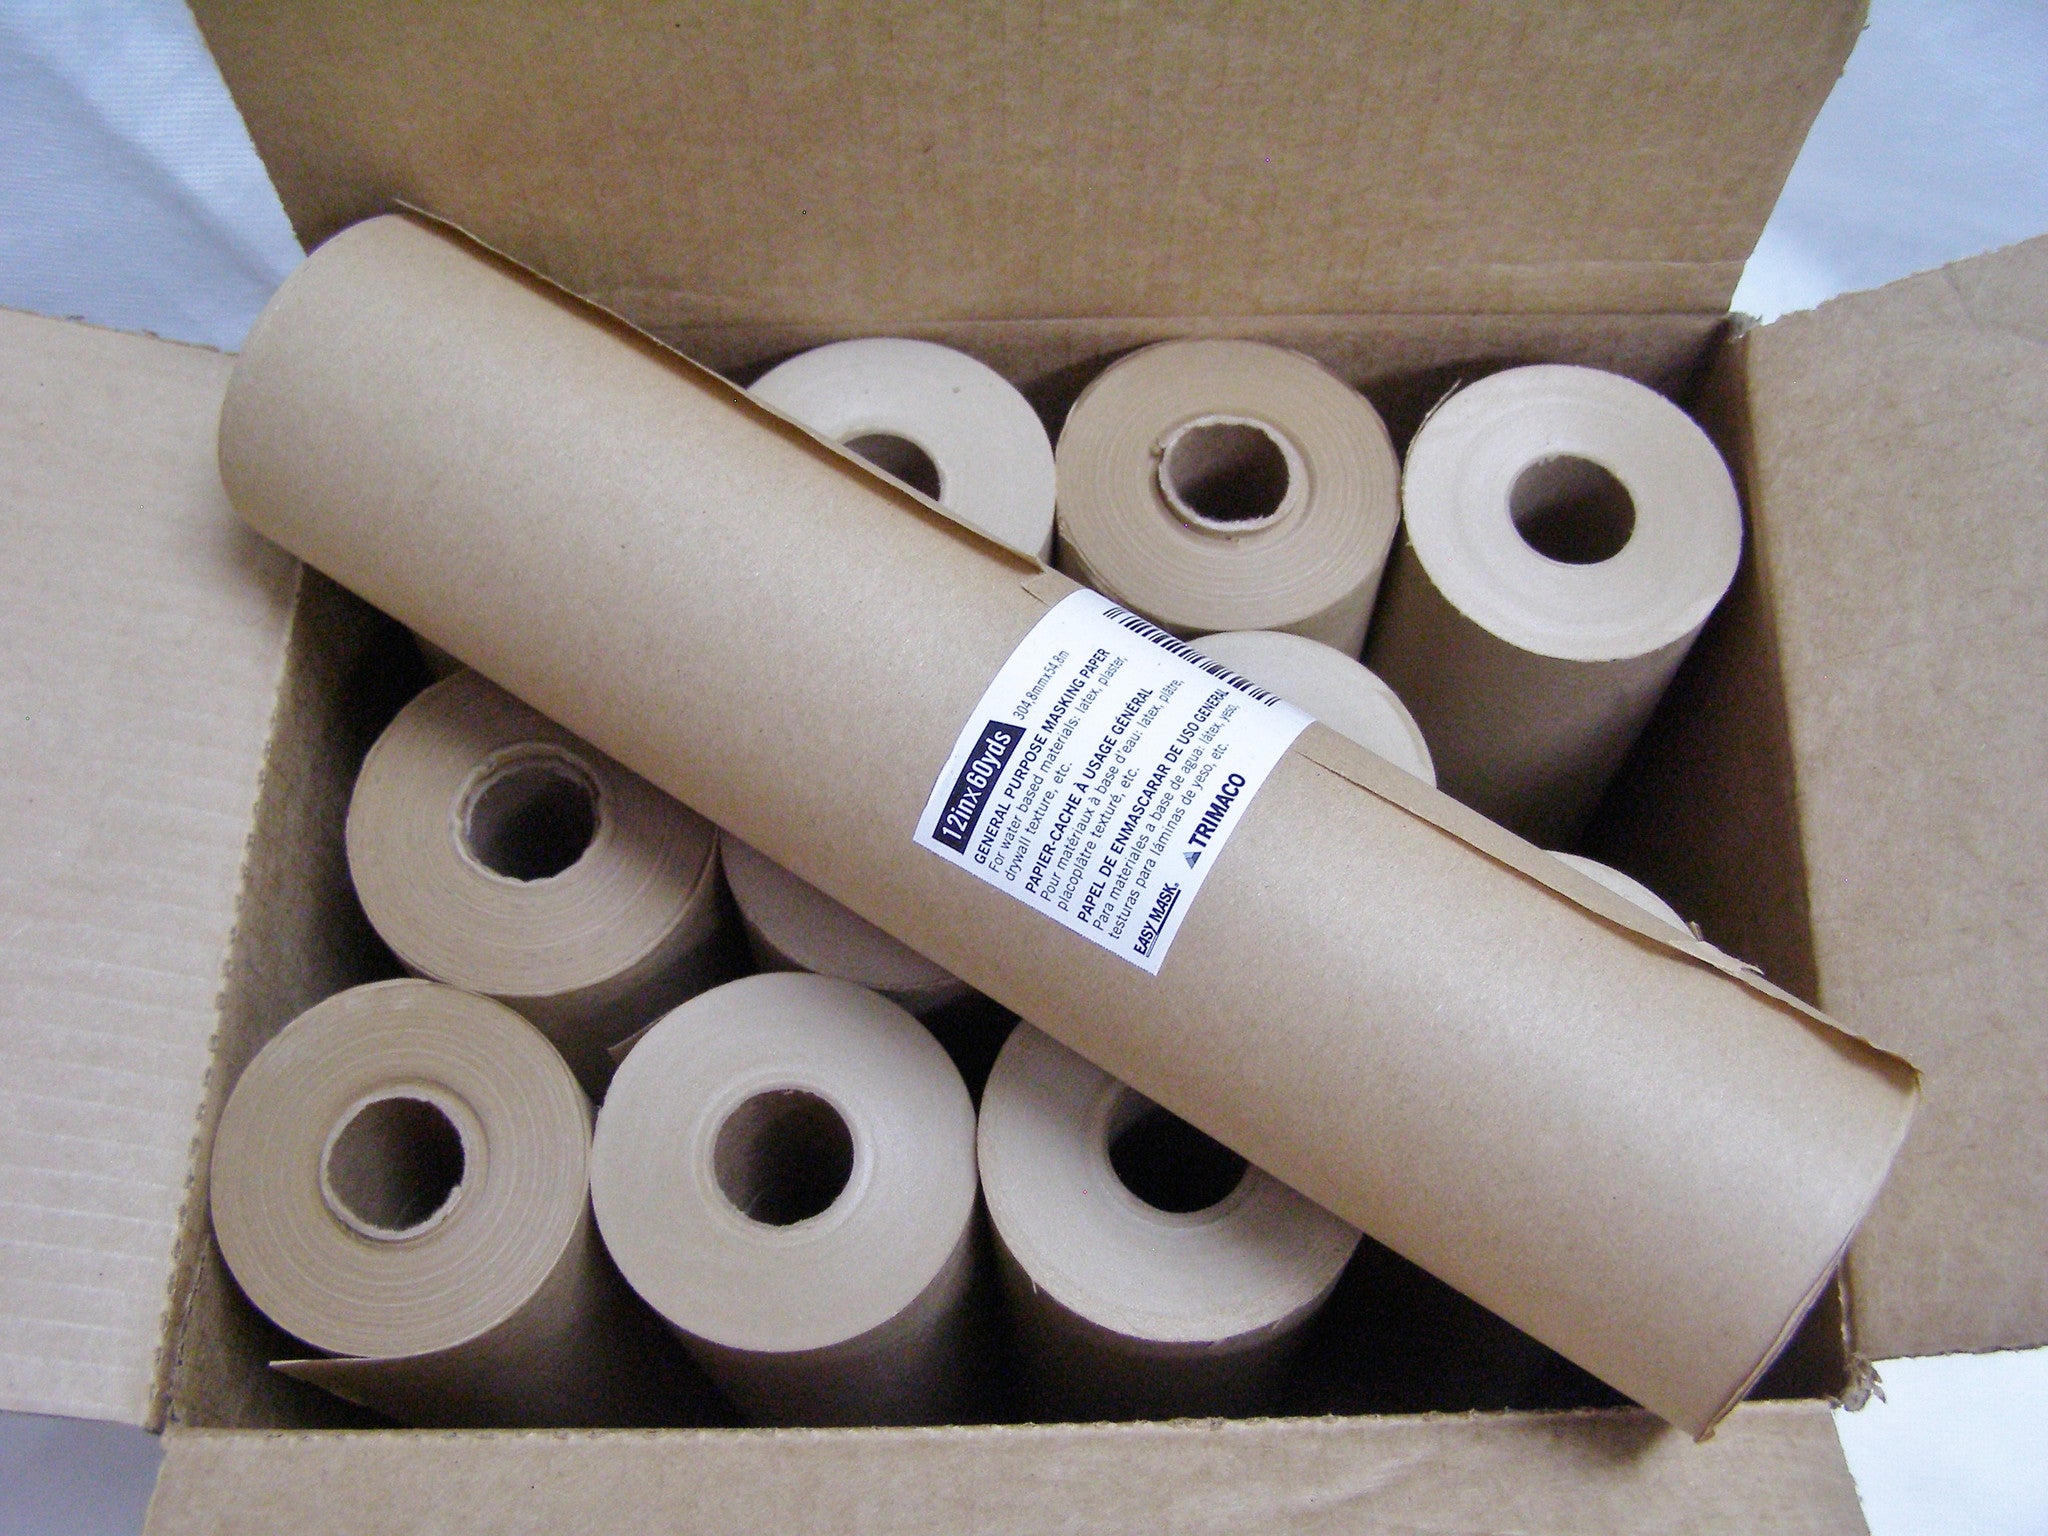 Trimaco 18 in. x 180 ft. Brown Masking Paper